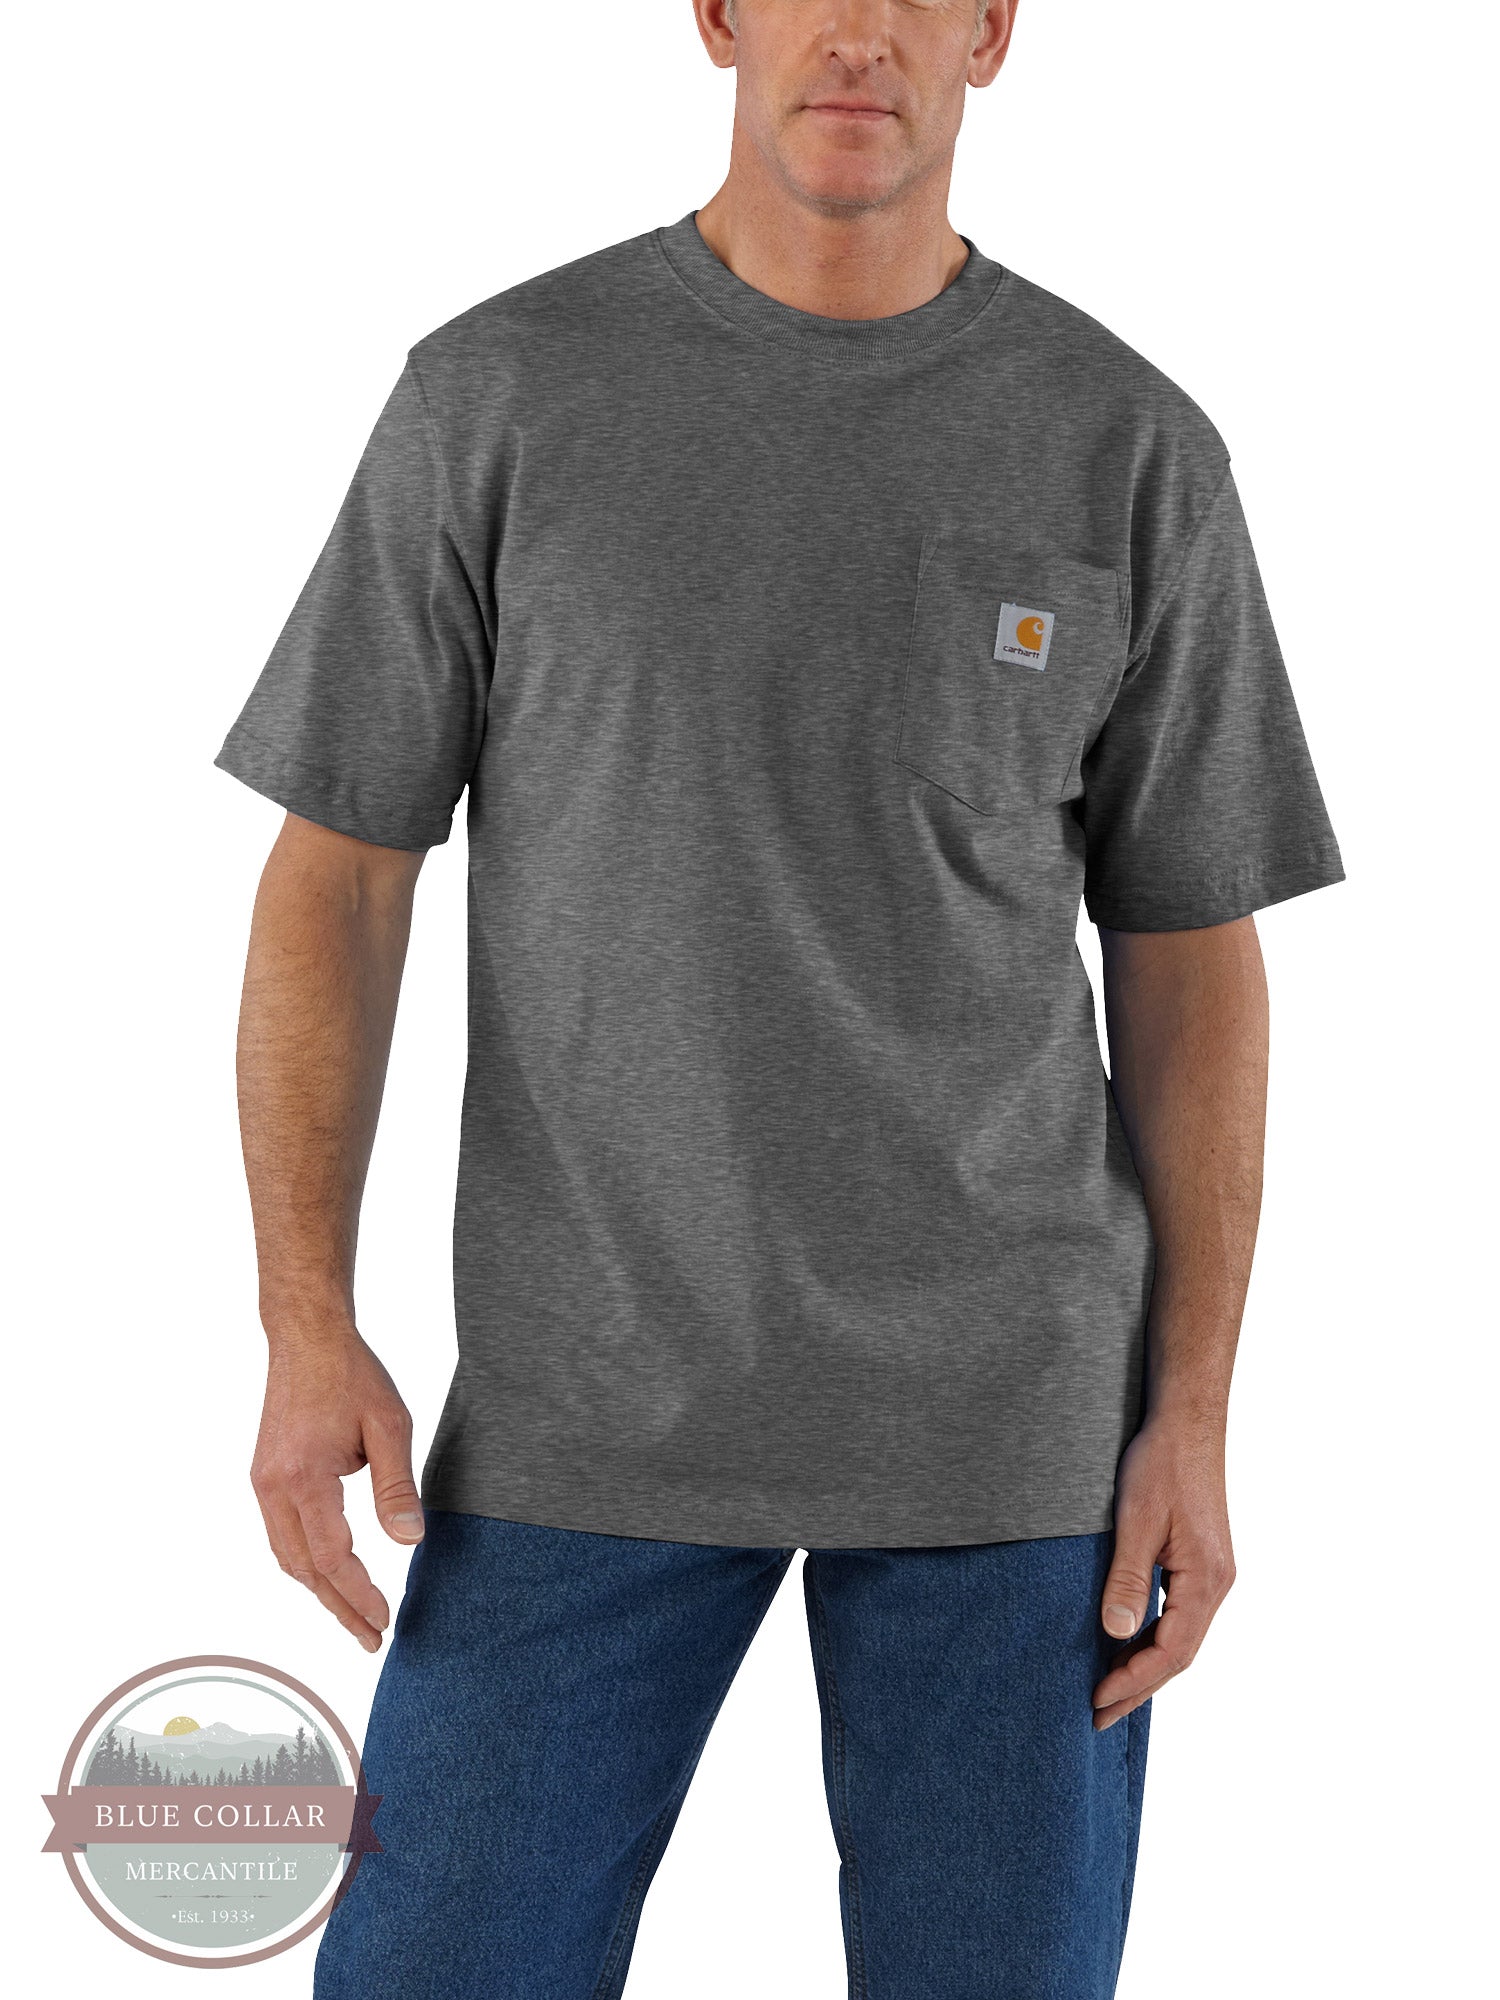 Carhartt K87 Loose Fit Heavyweight Short Sleeve Pocket T-Shirt Basic Colors Carbon Heather Front View